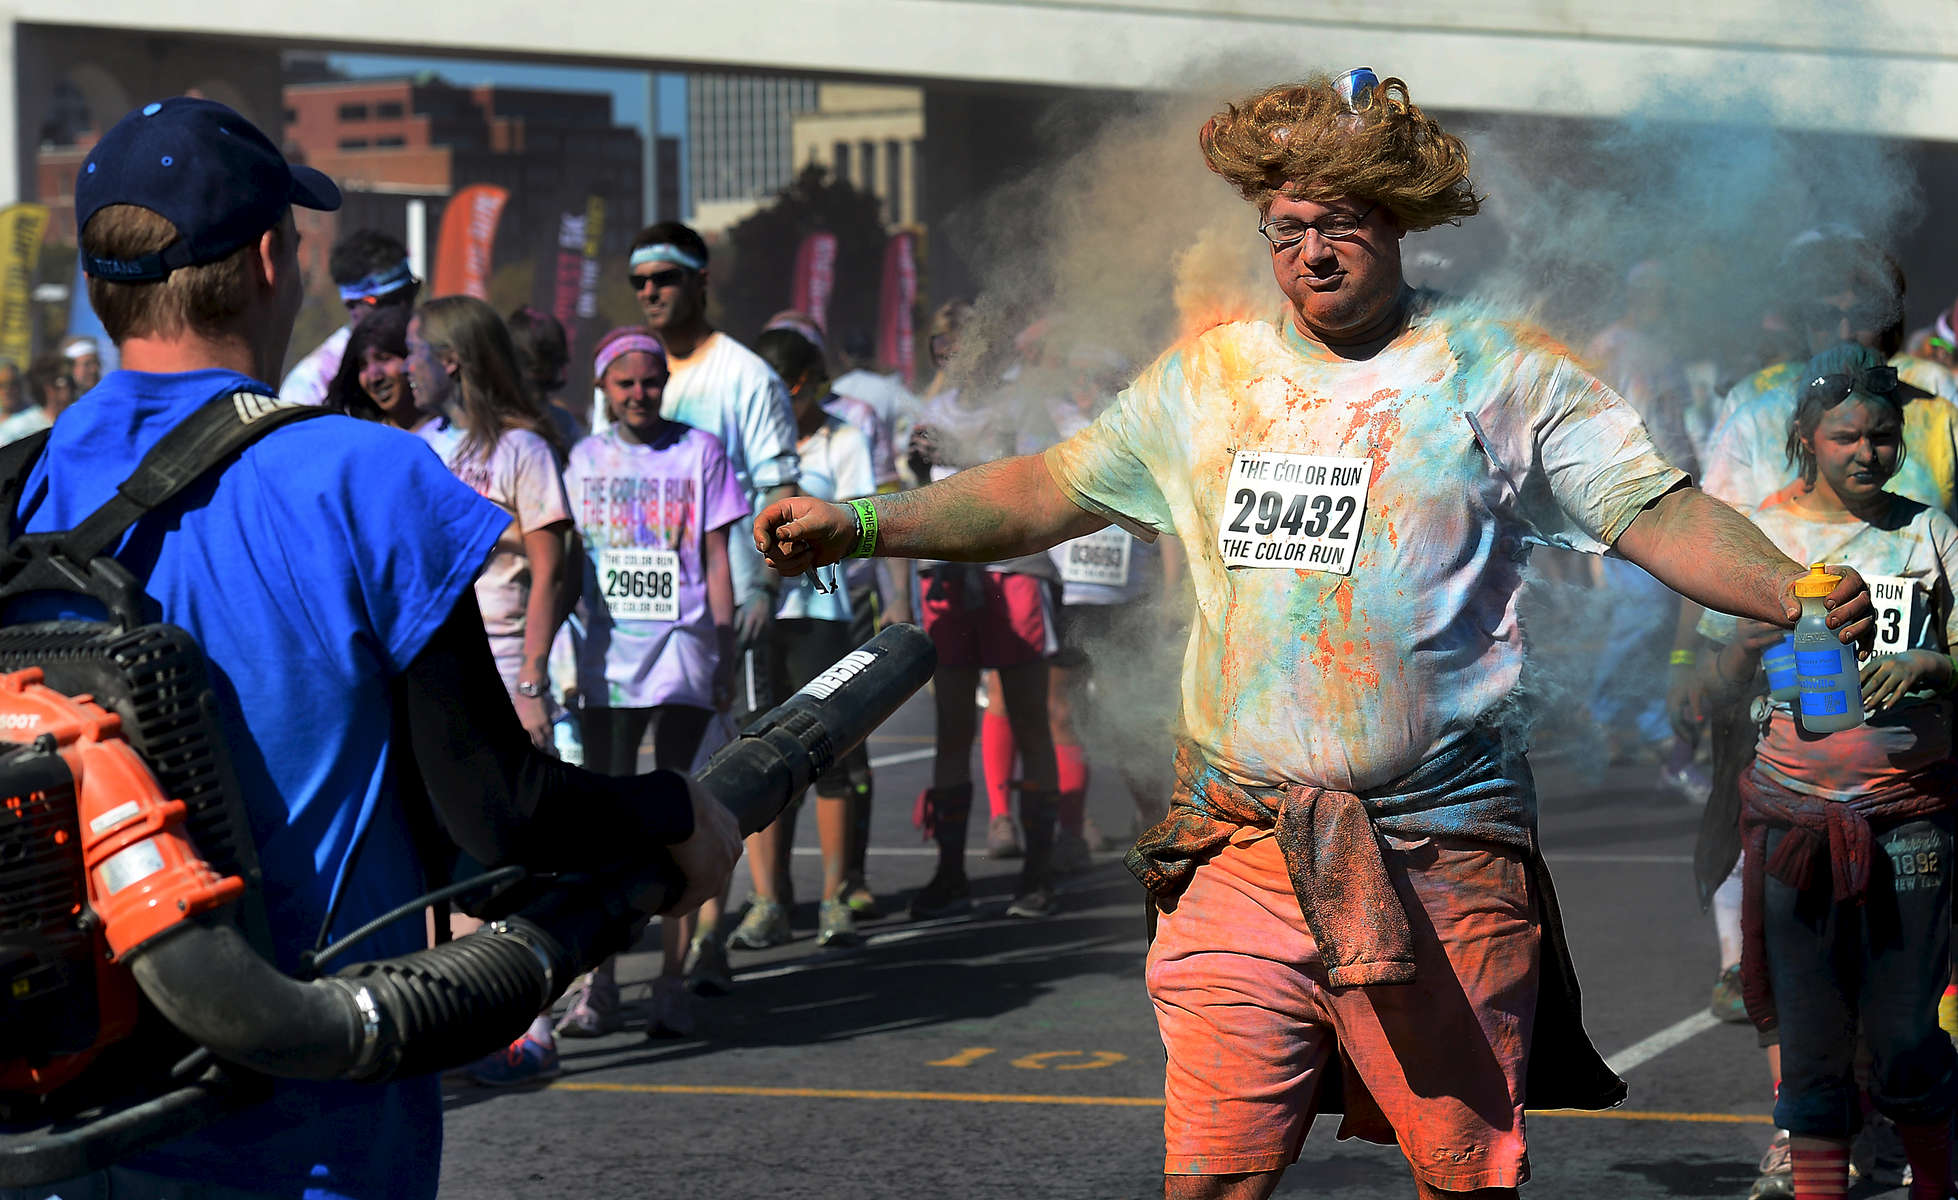 After competing in the 5K Color Run in Nashville, Tenn., participants line up to have the colored dust blown off of them in the festival area. (Mark Zaleski/ For The Tennessean)